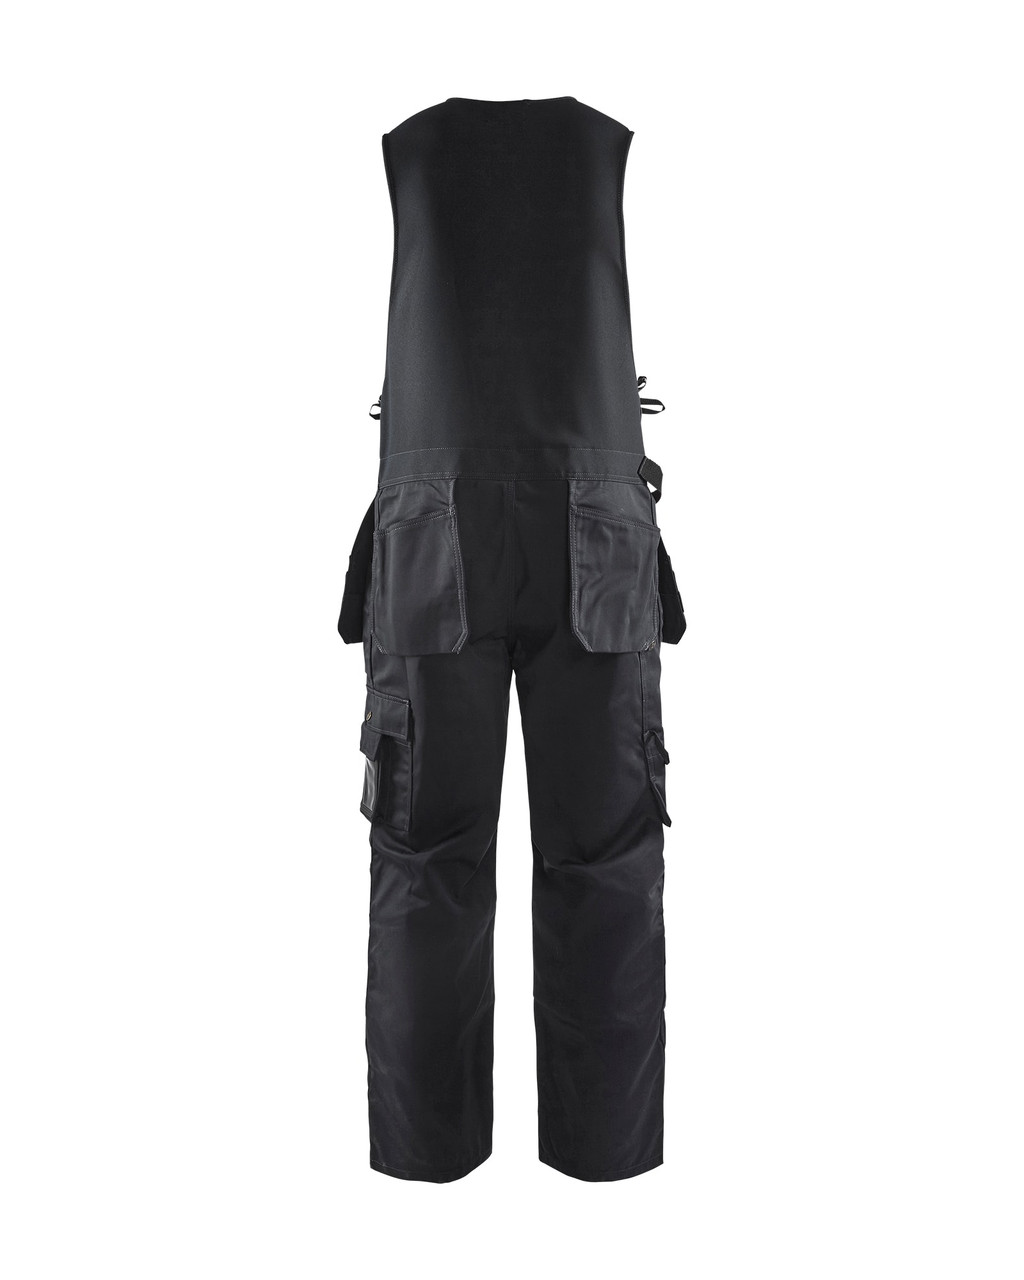 BLAKLADER Durable Poly/Cotton Blend Black Overalls  for Painters that have Kneepad Pockets  available in Australia and New Zealand